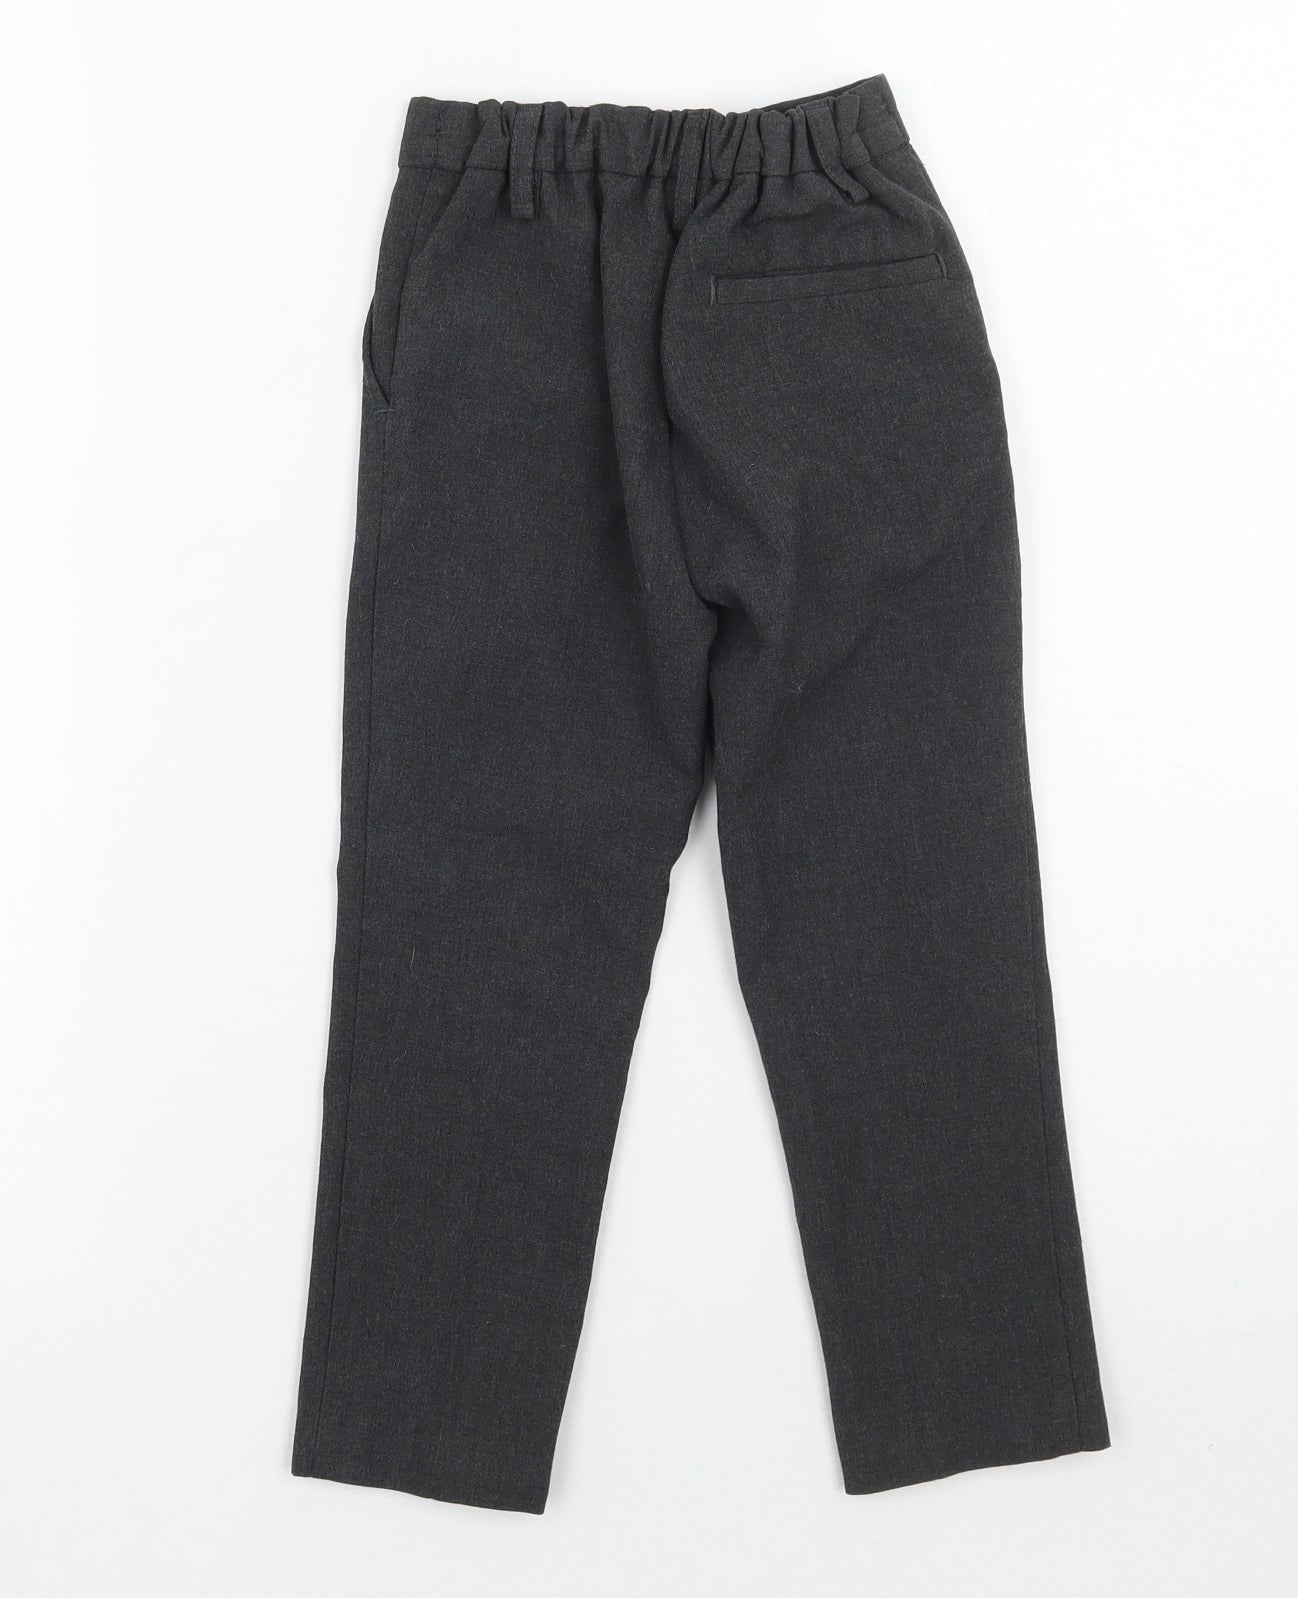 Marks and Spencer Boys Grey   Capri Trousers Size 3-4 Years